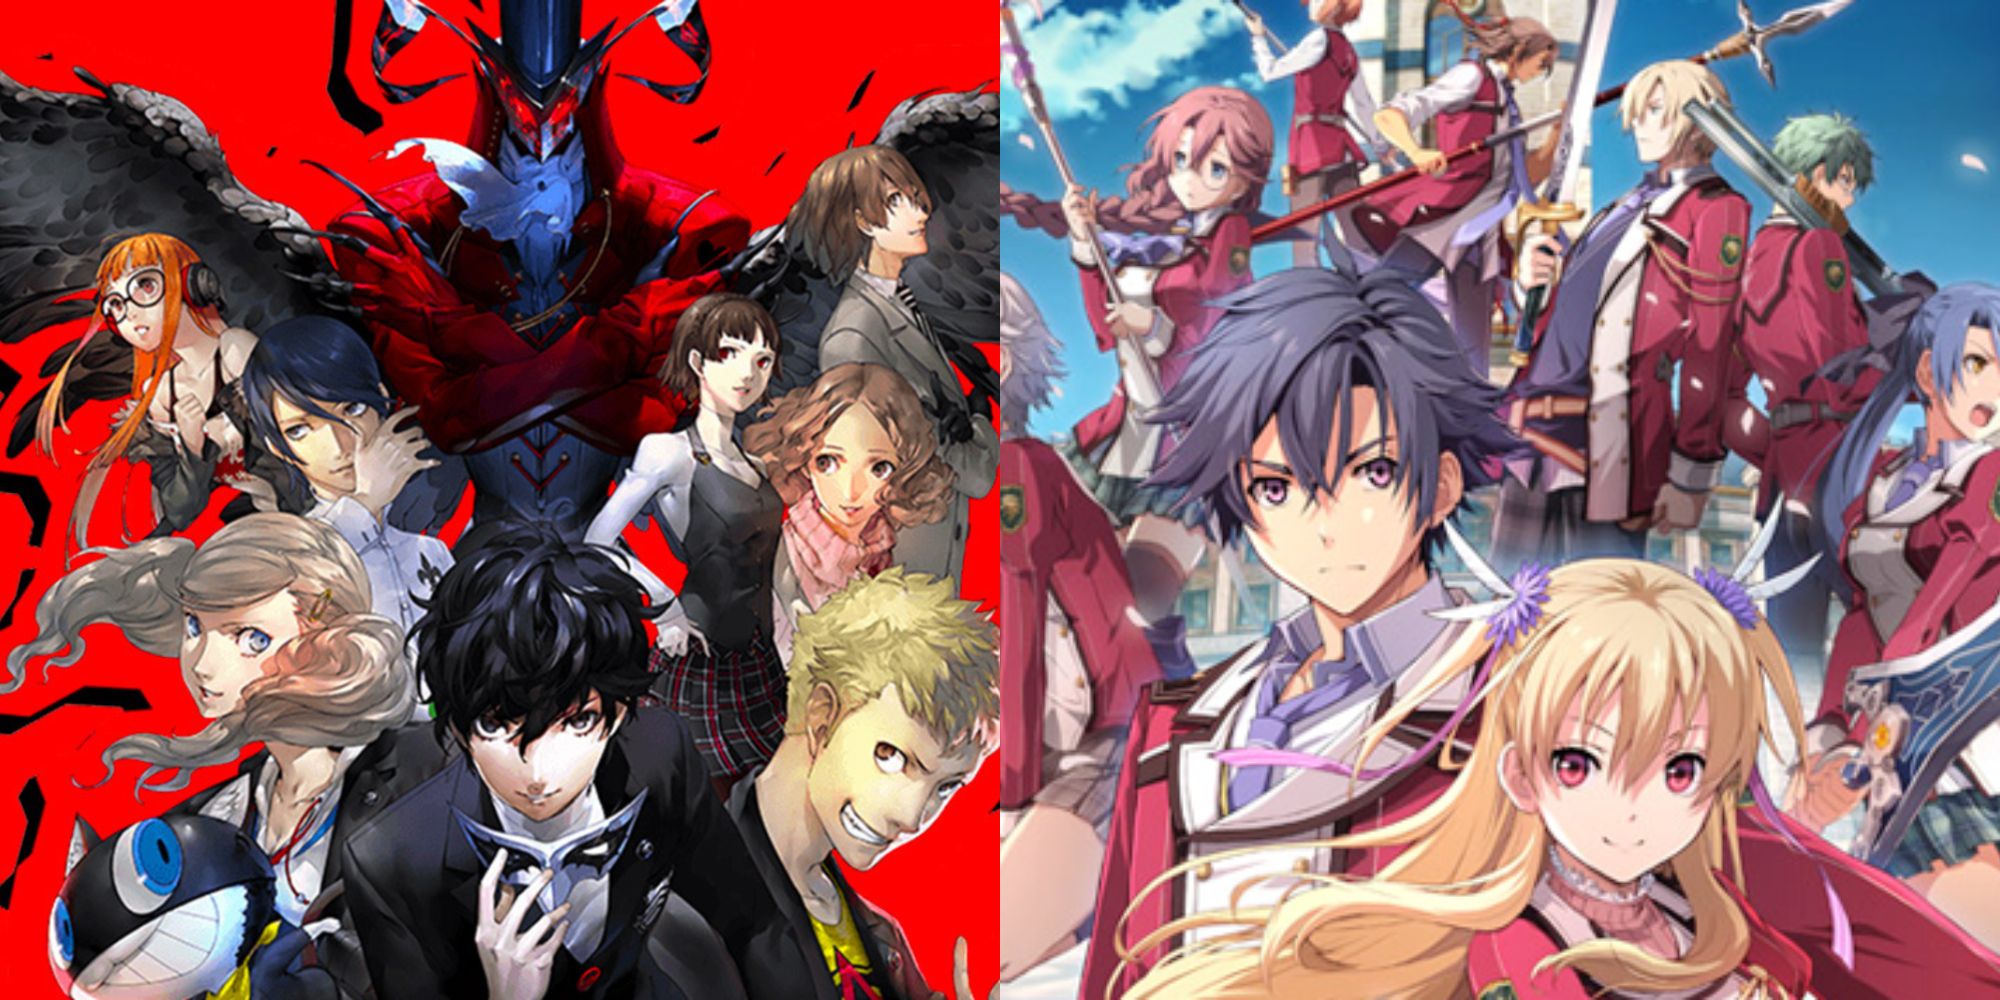 Split image showing characters from Person 5 and The Legend Of Heroes Trails Of Cold Steel.